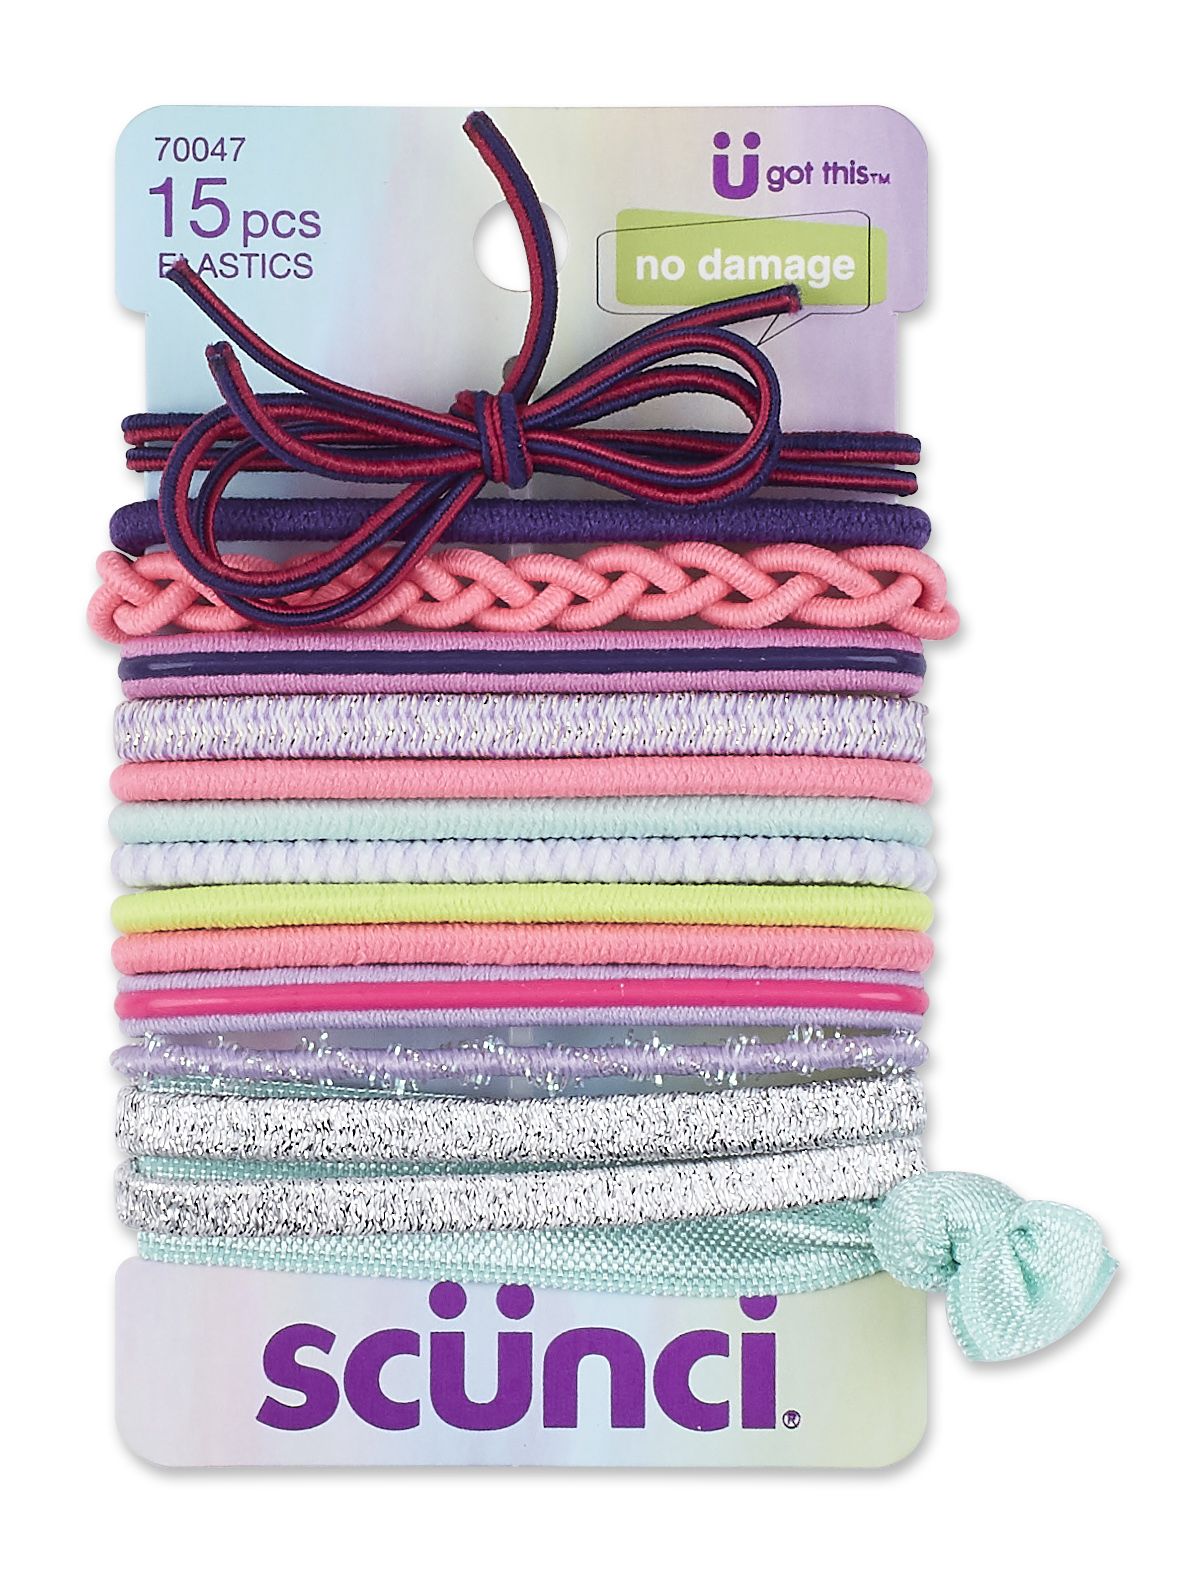 Scunci No-Damage Elastic Stretch Hairbands in Assorted Textures, Styles, and Bright & Neutral Colors - Click Image to Close